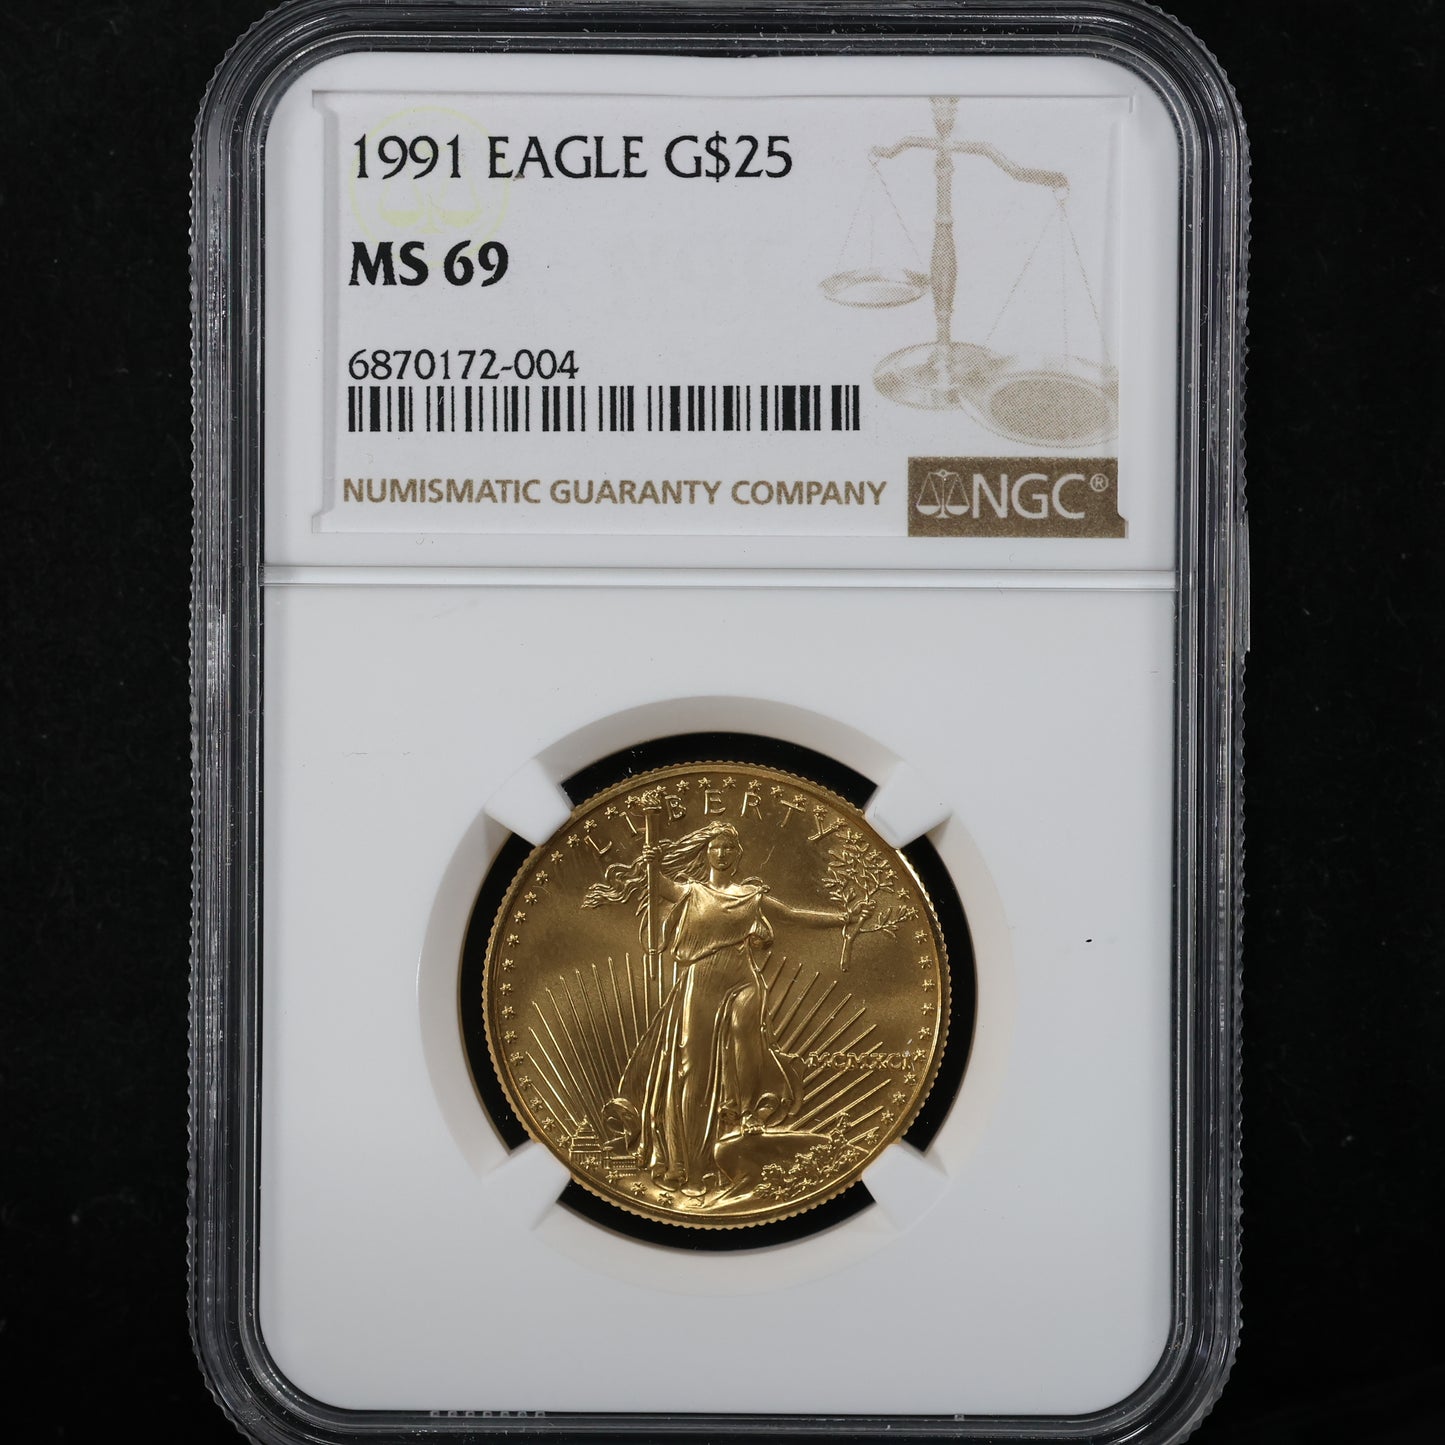 1991 1/2 oz Gold American Eagle 25$ Bullion Gold Coin - NGC MS 69